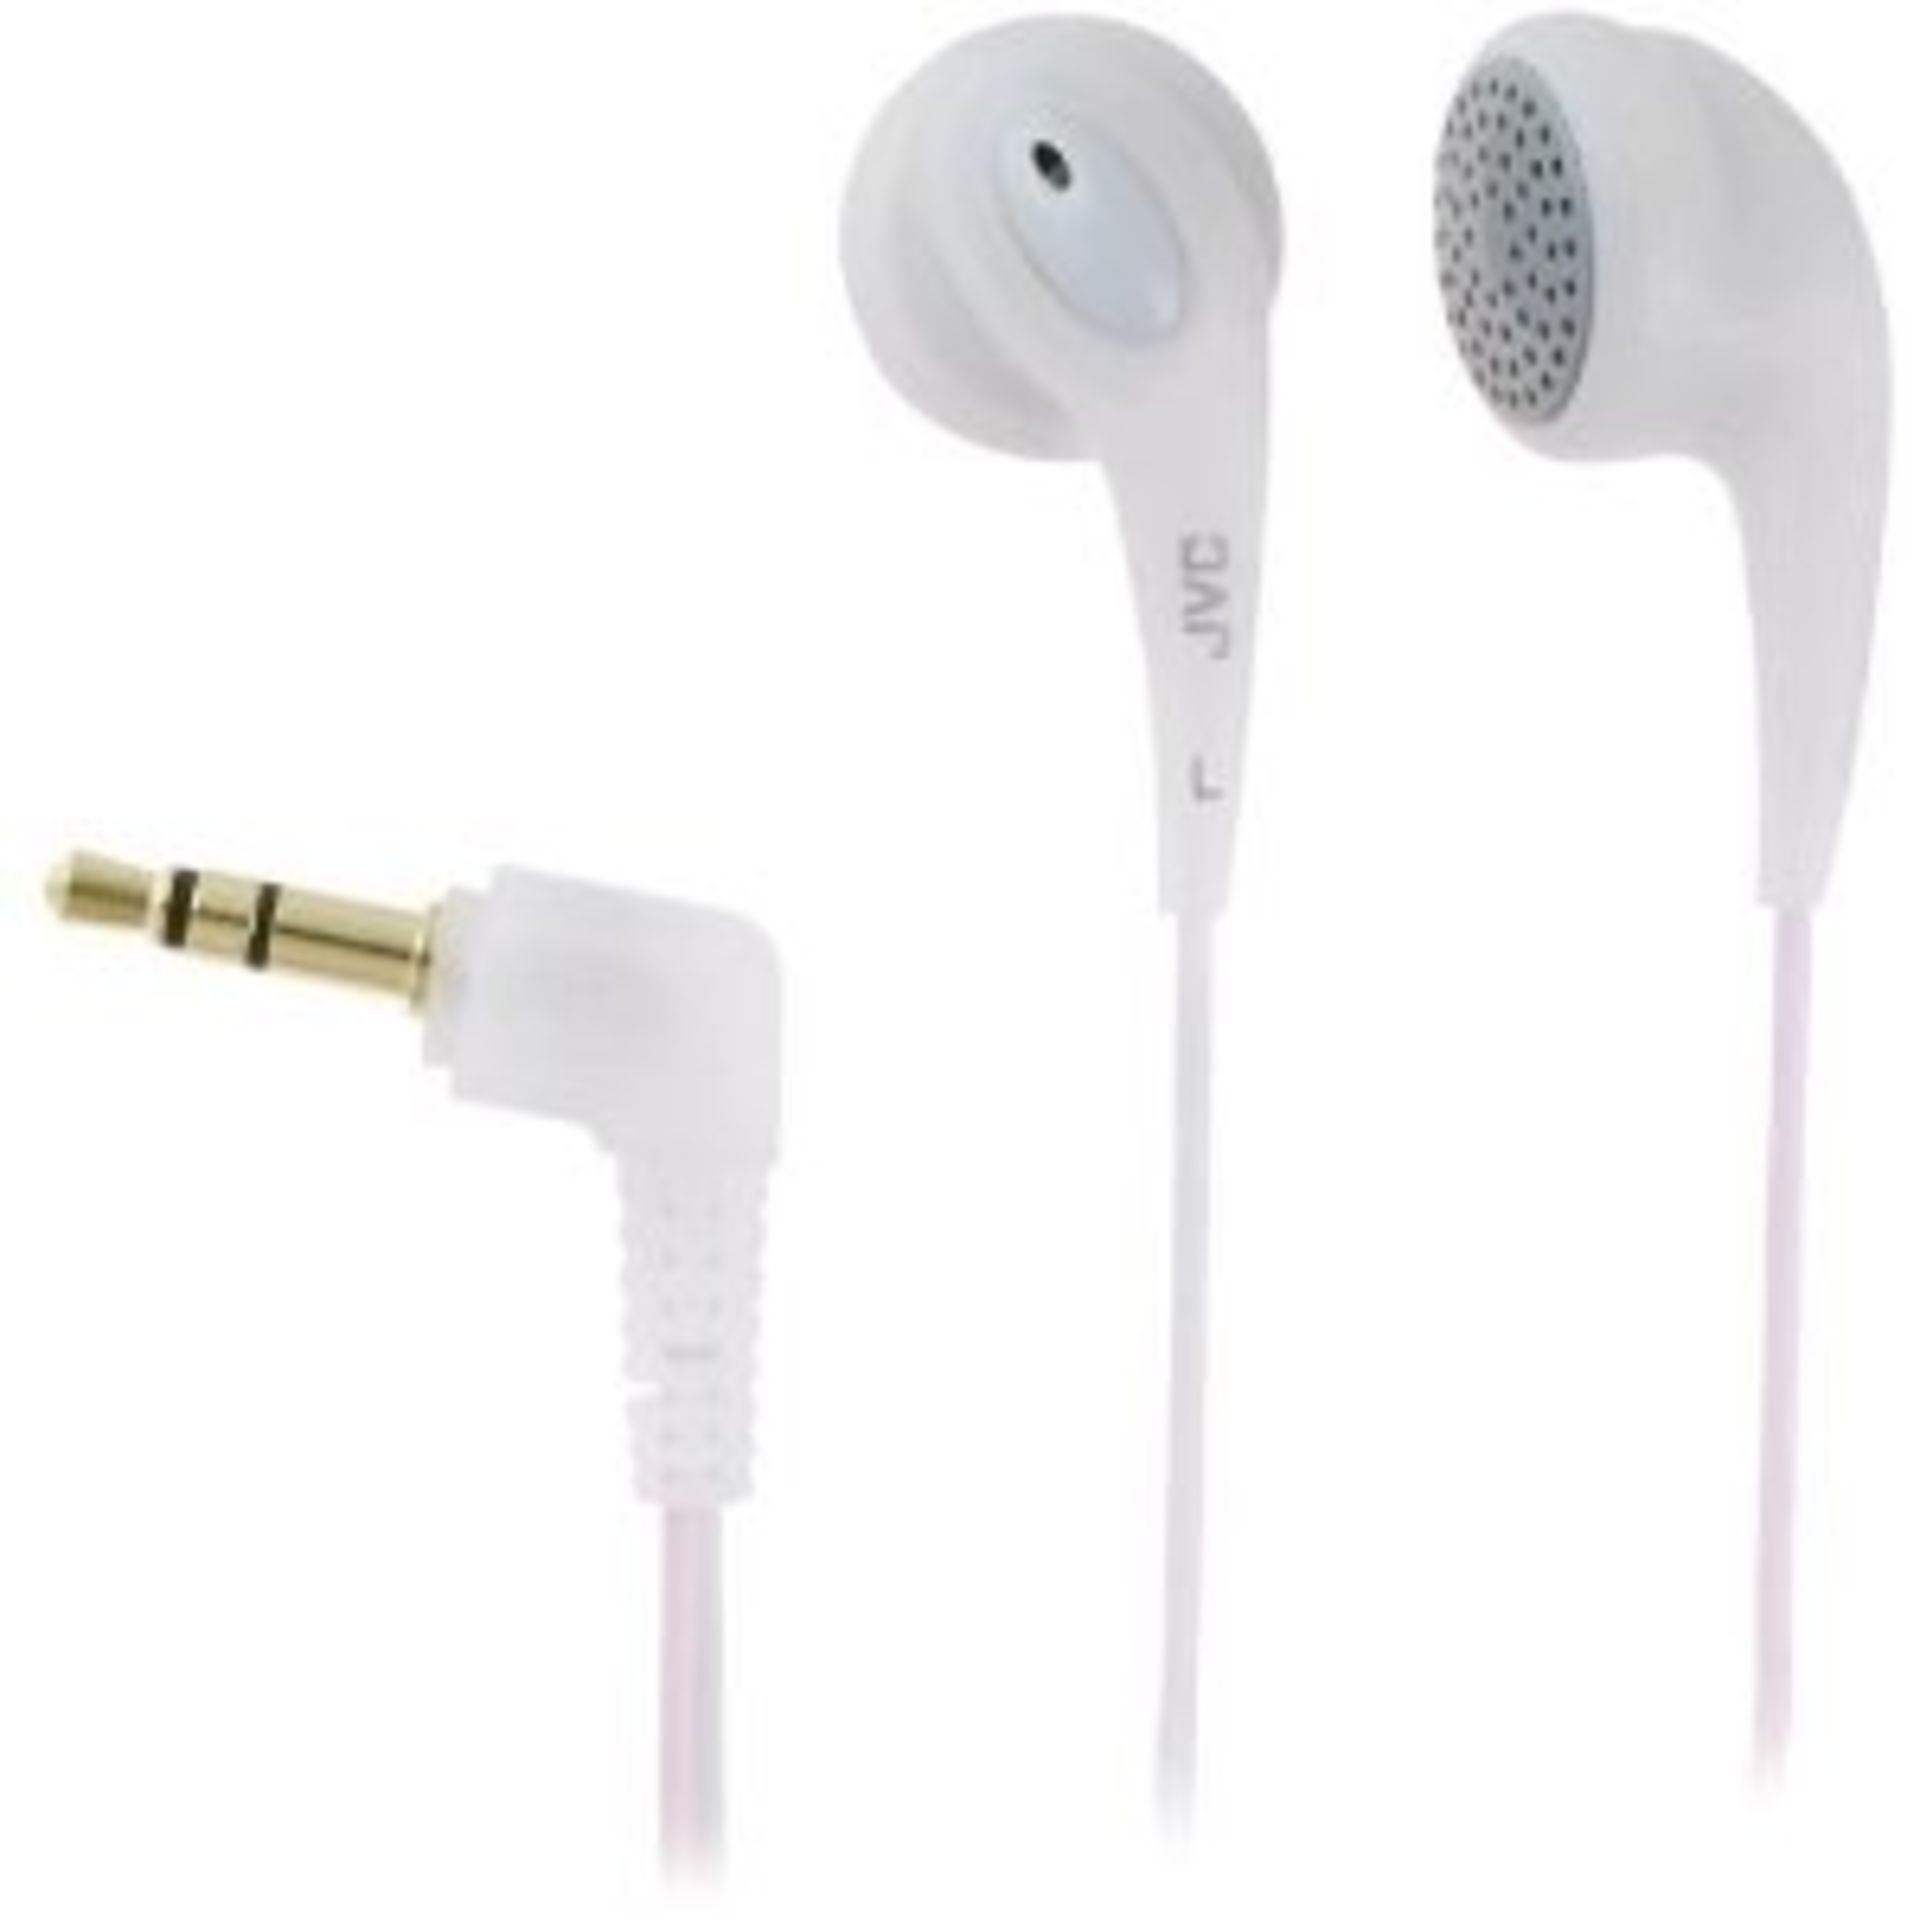 Brand New JVC Gummy Earphones Peach White RRP: £15.99 X 4 Bid price to be multiplied by Four